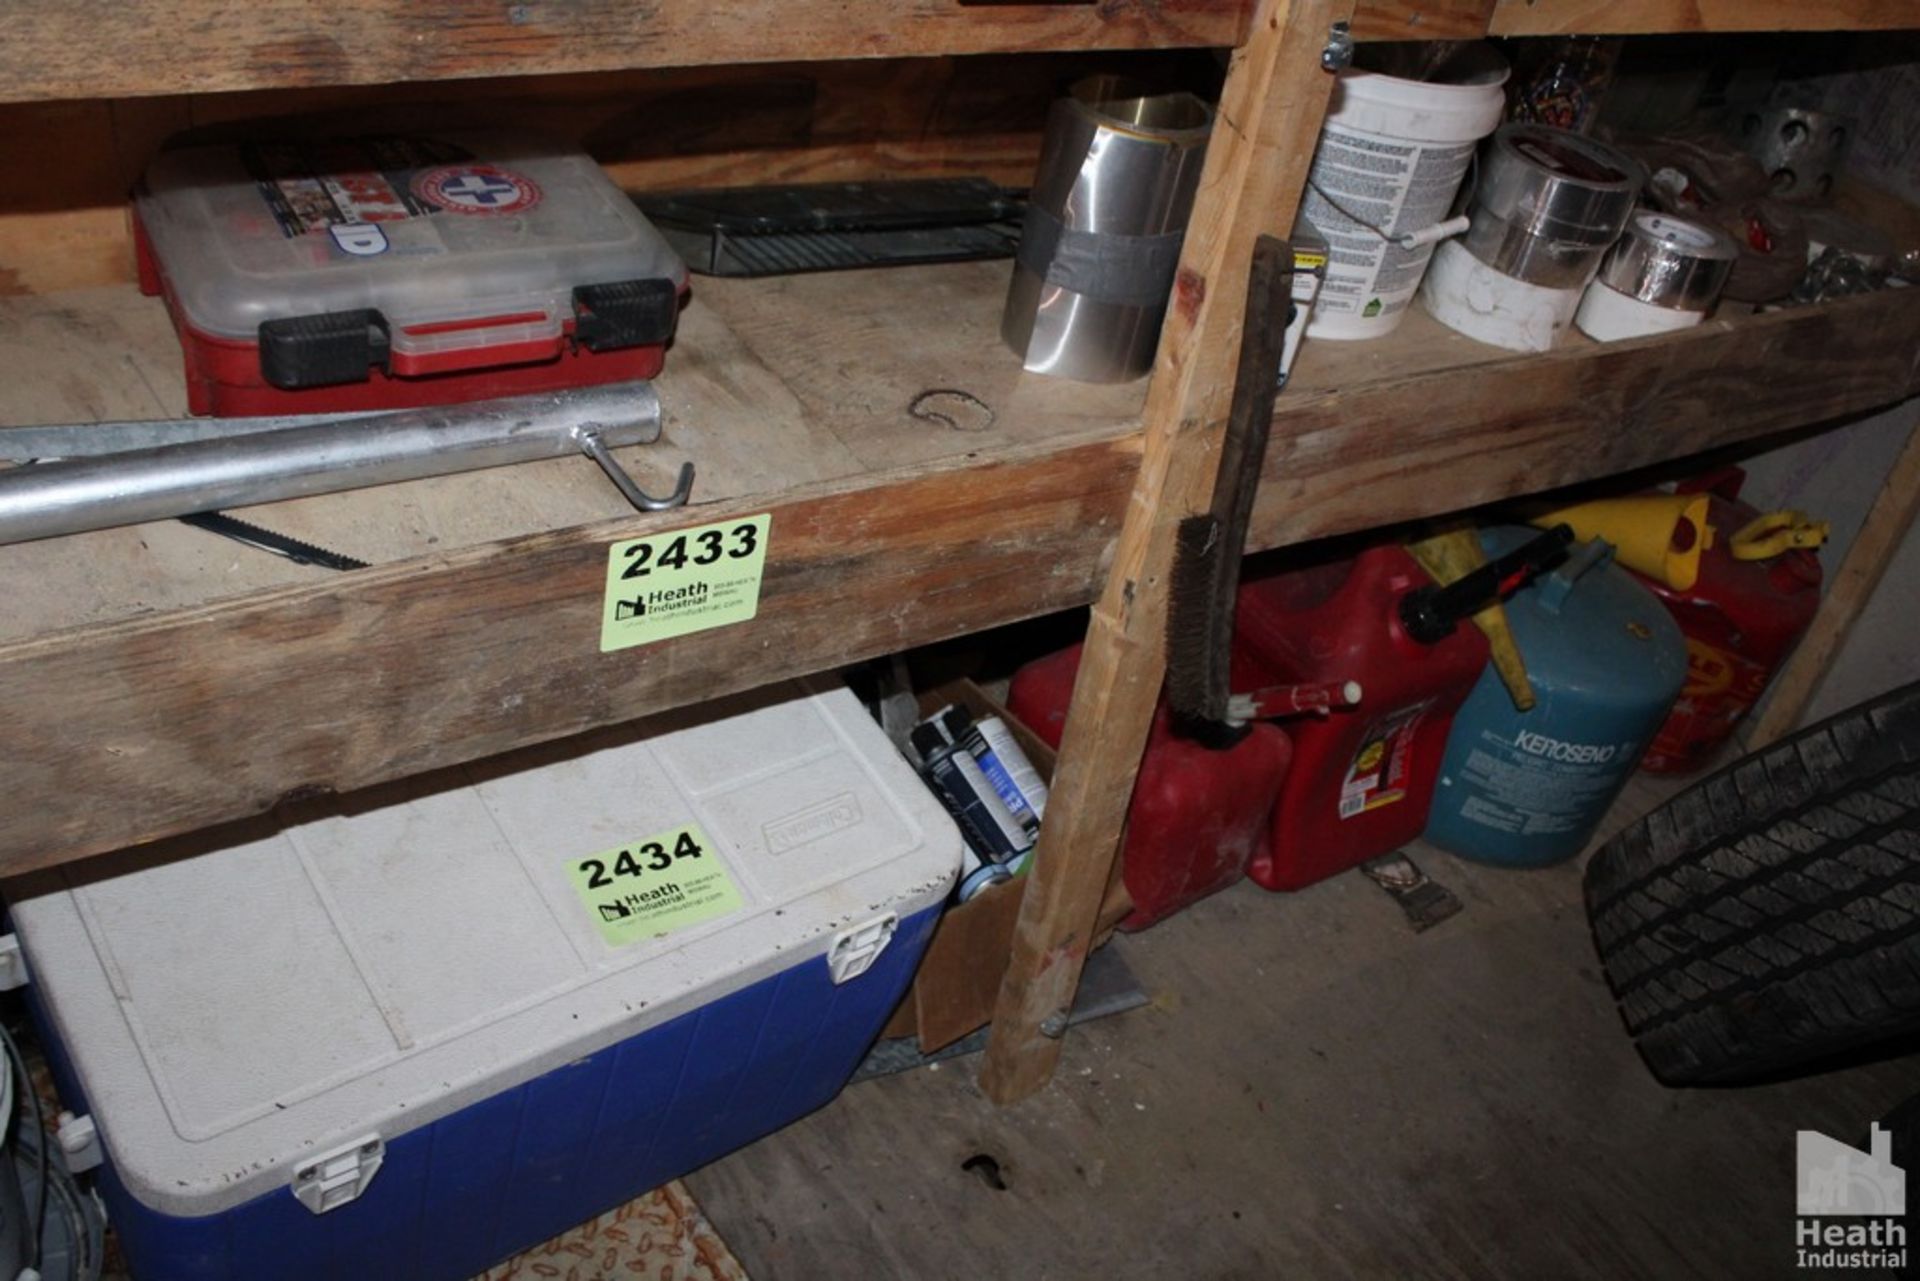 COOLER, HARDWARE AND GAS CANS ON SHELF